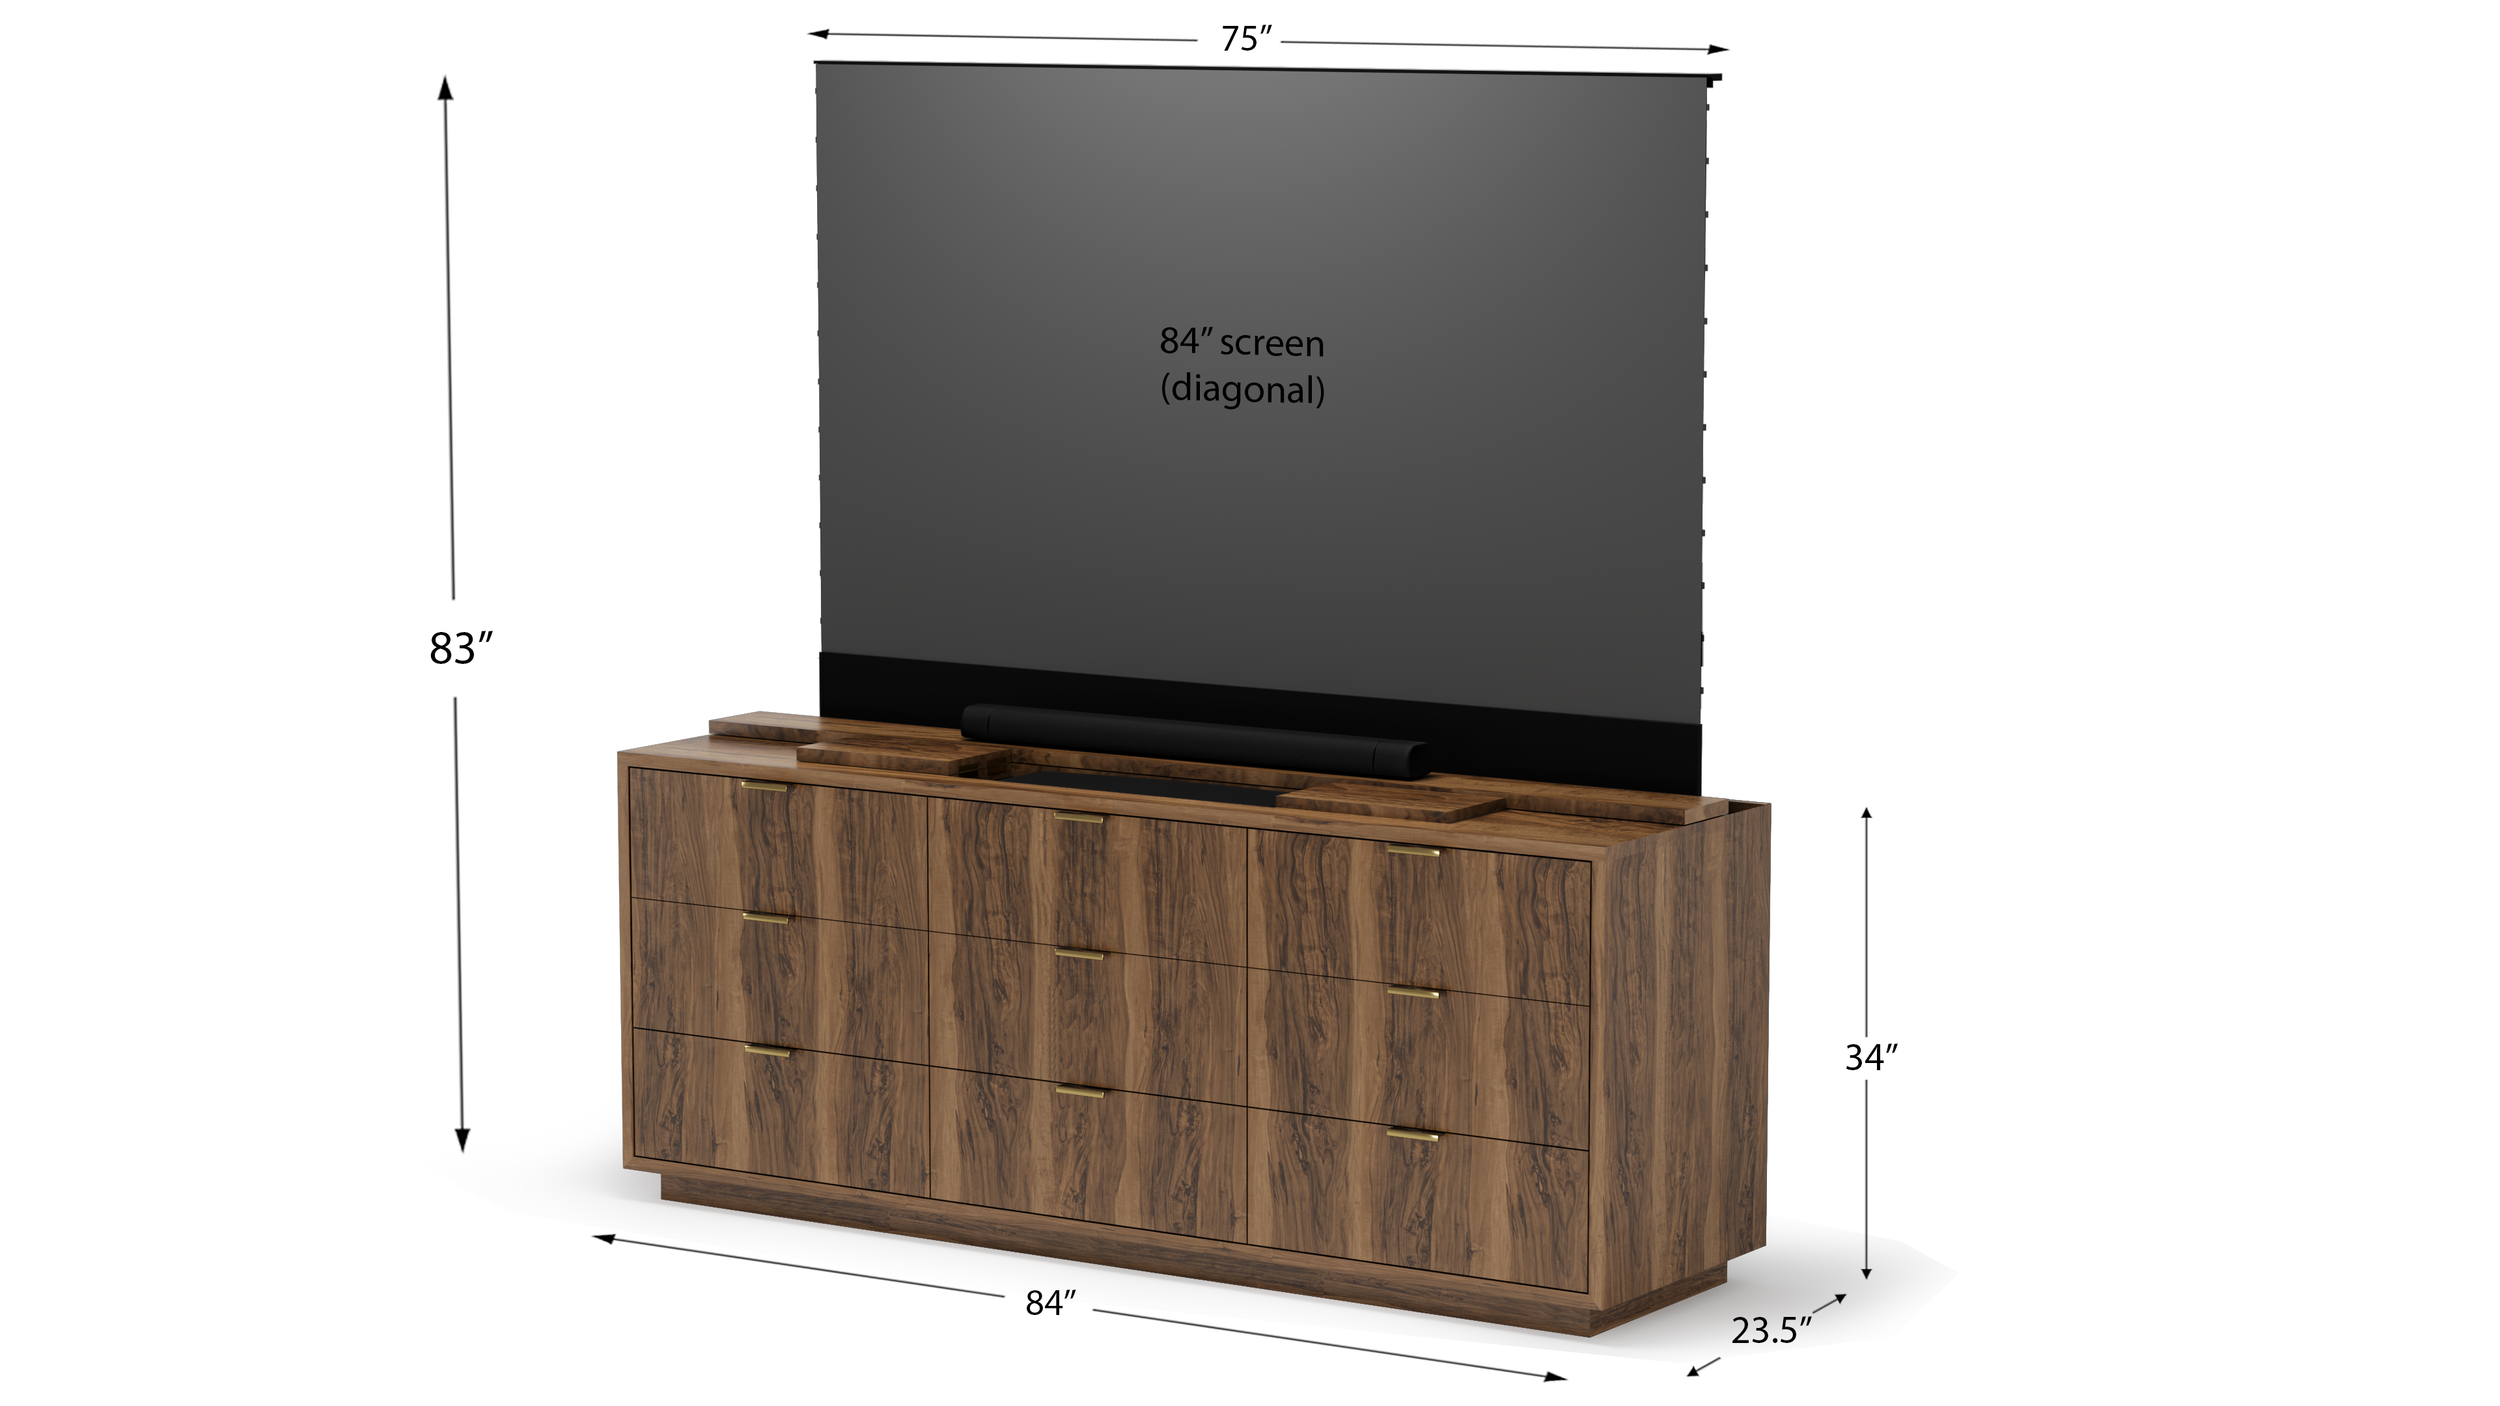 Render Dimensions 84 inch screen (1).png